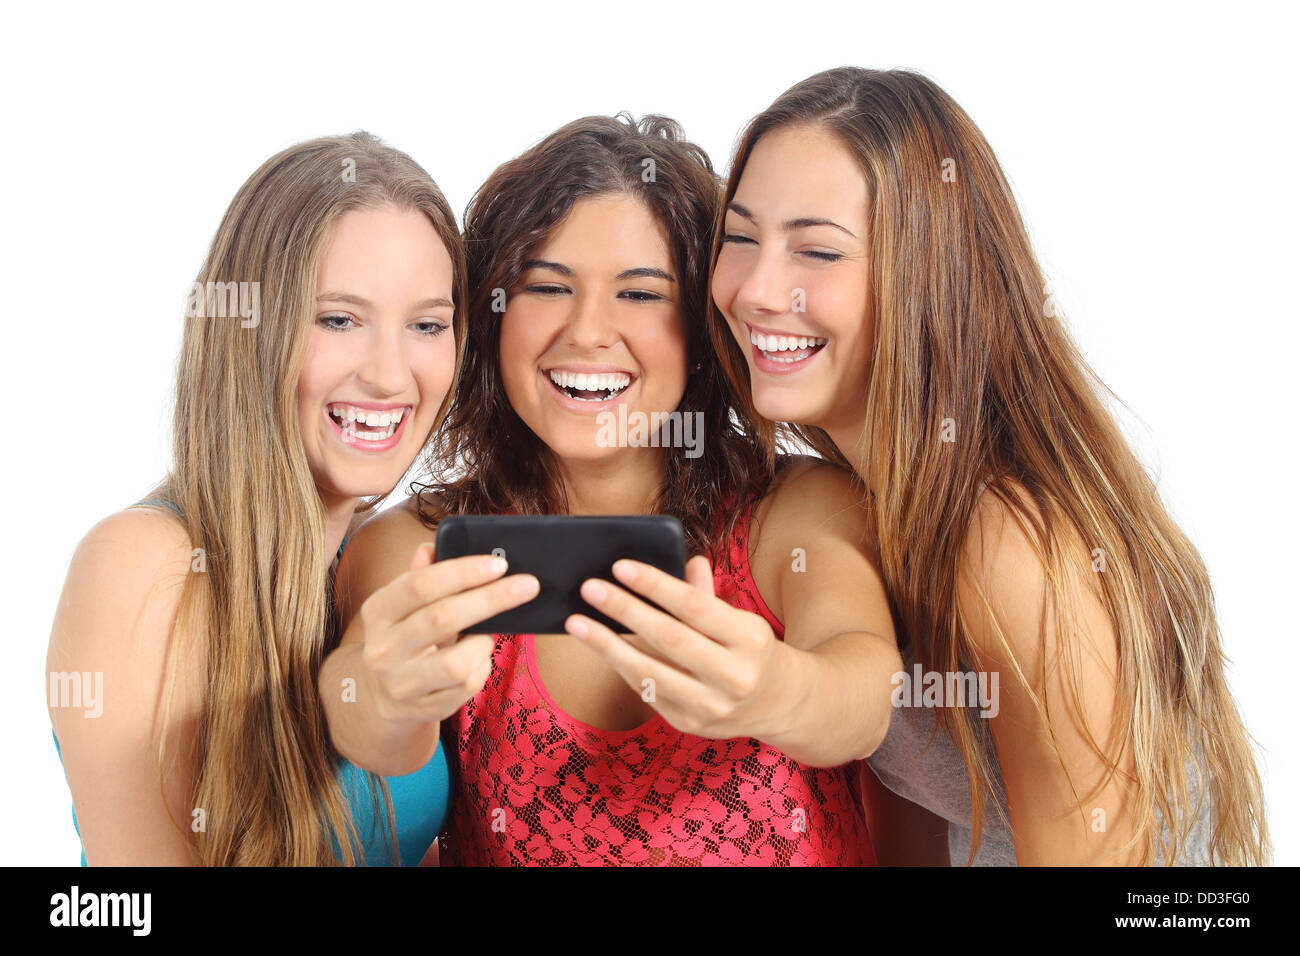 Group of three teenager girls laughing looking the smart phone isolated on a white background Stock Photo